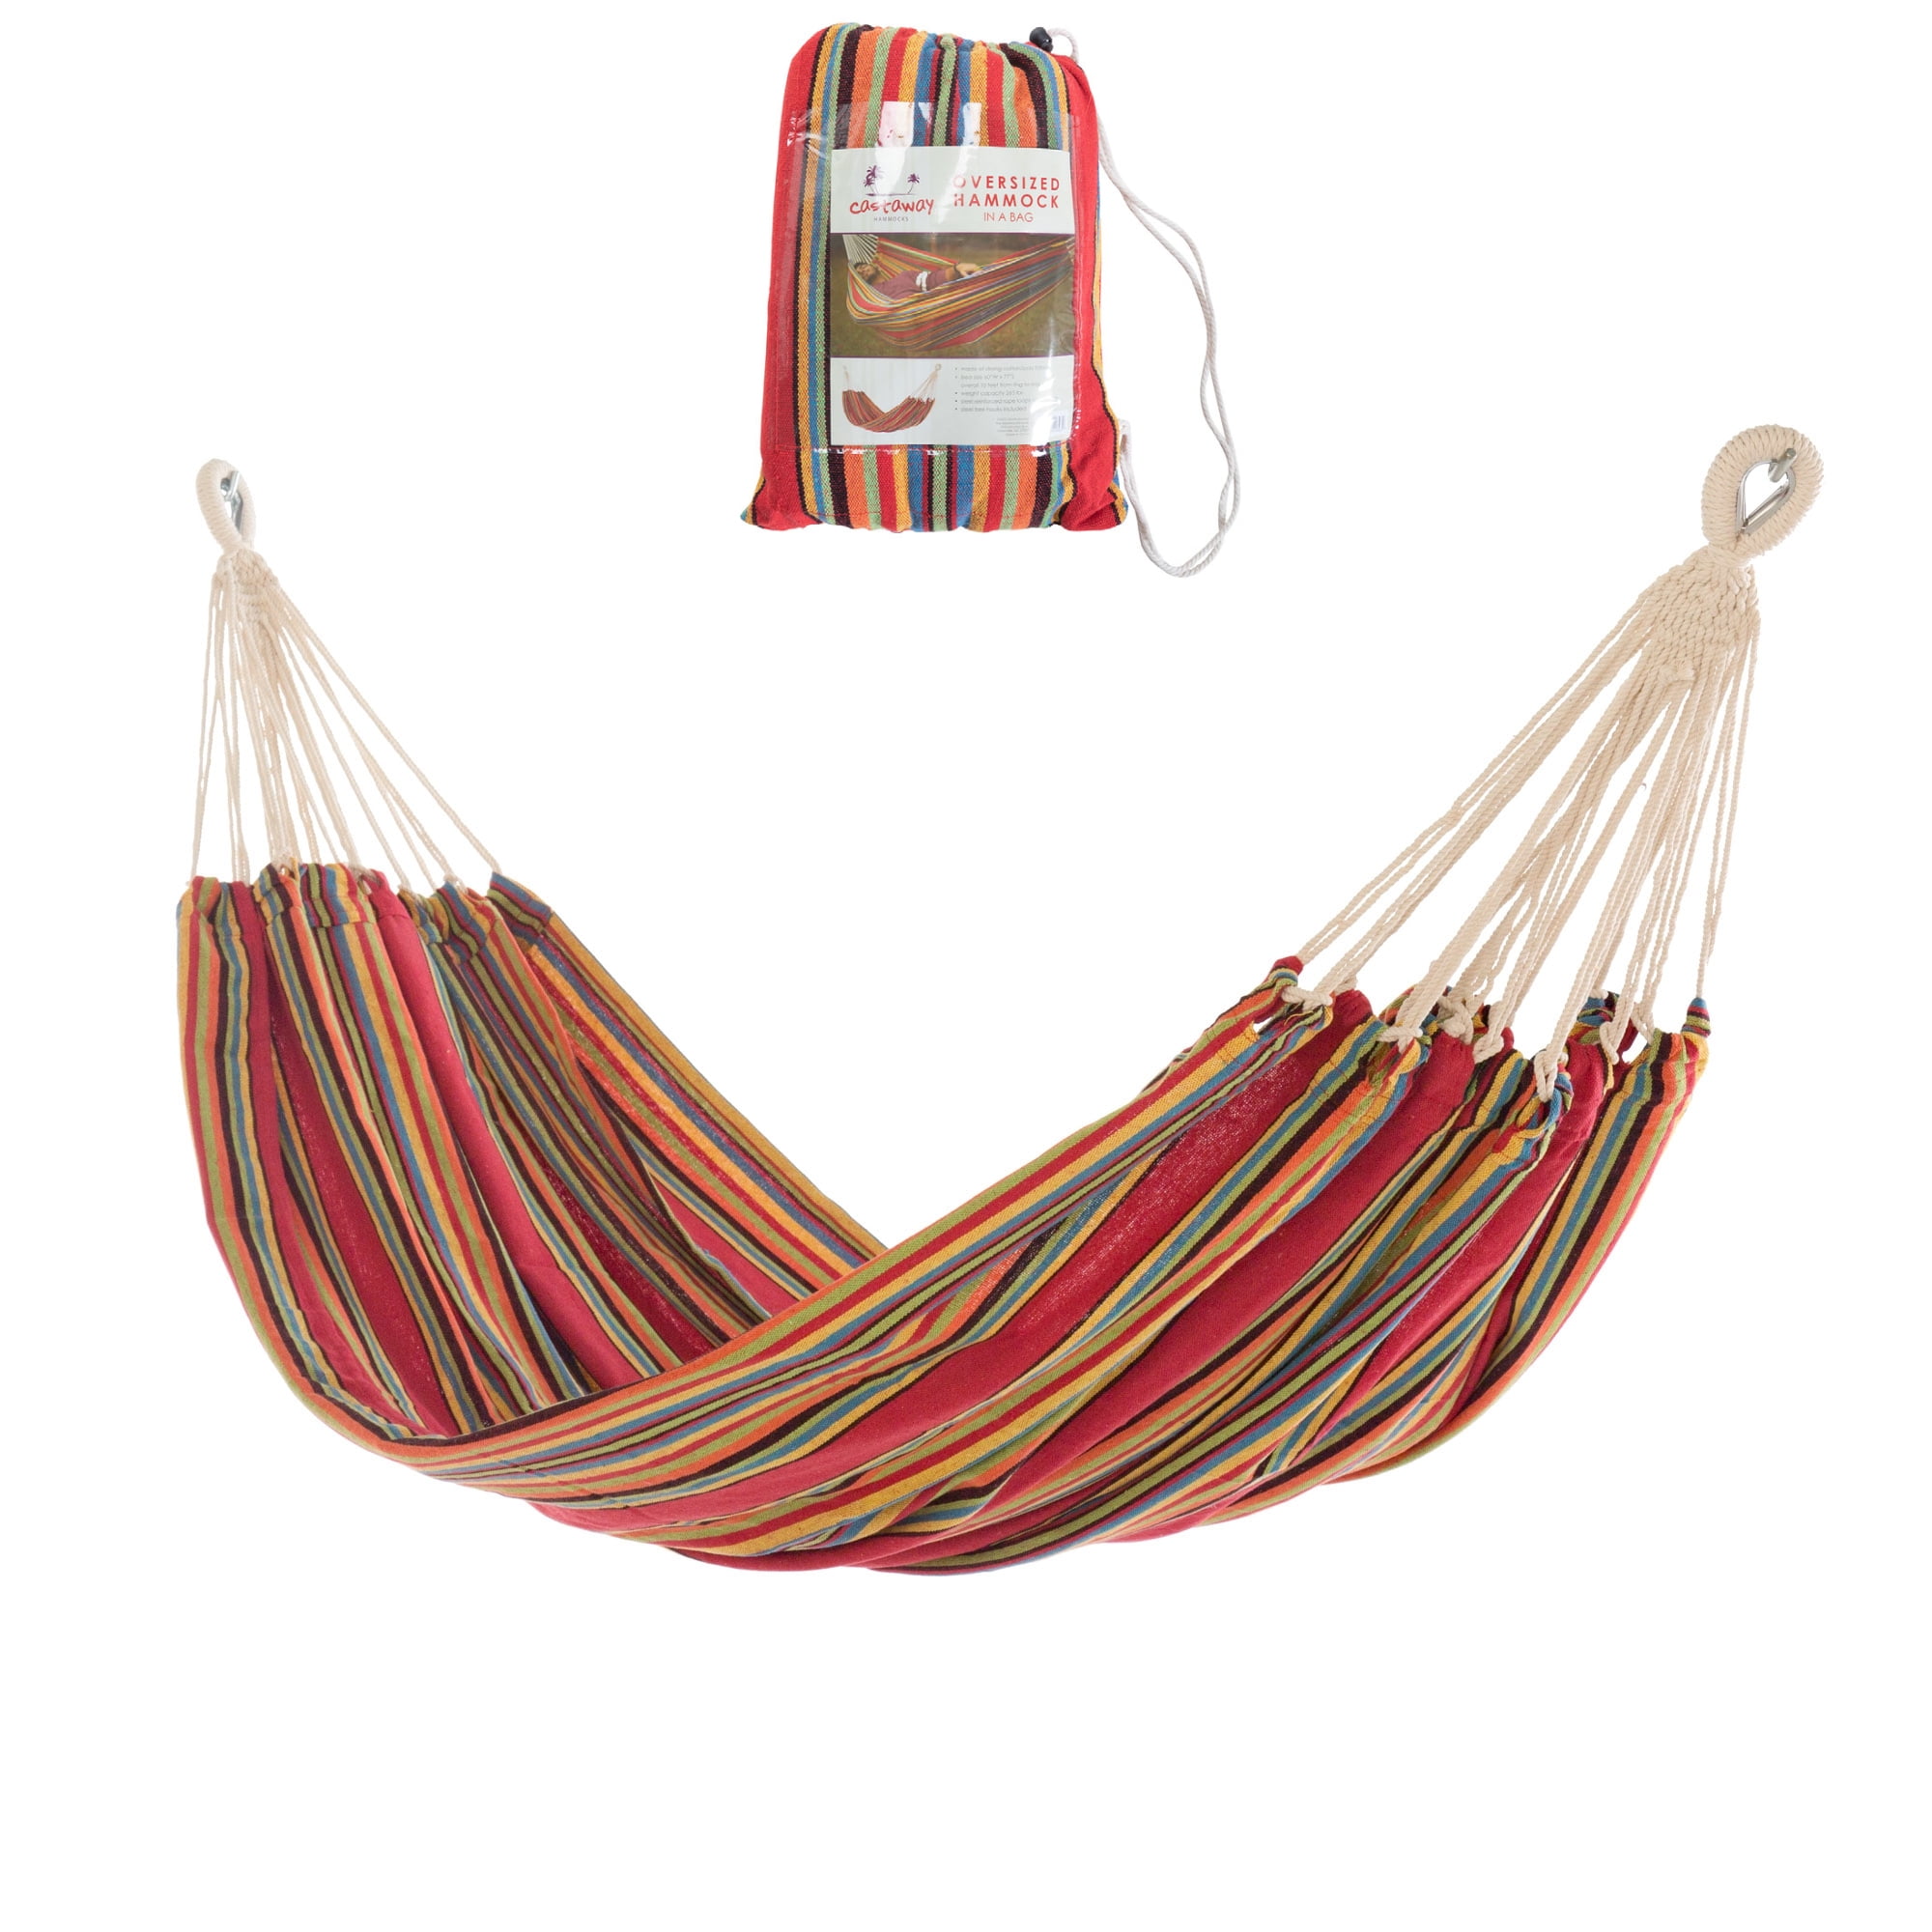 Details about   Large Hammock Double Size Premium Handmade Brazilian 13.8 x 5.3 ft Deep Red 